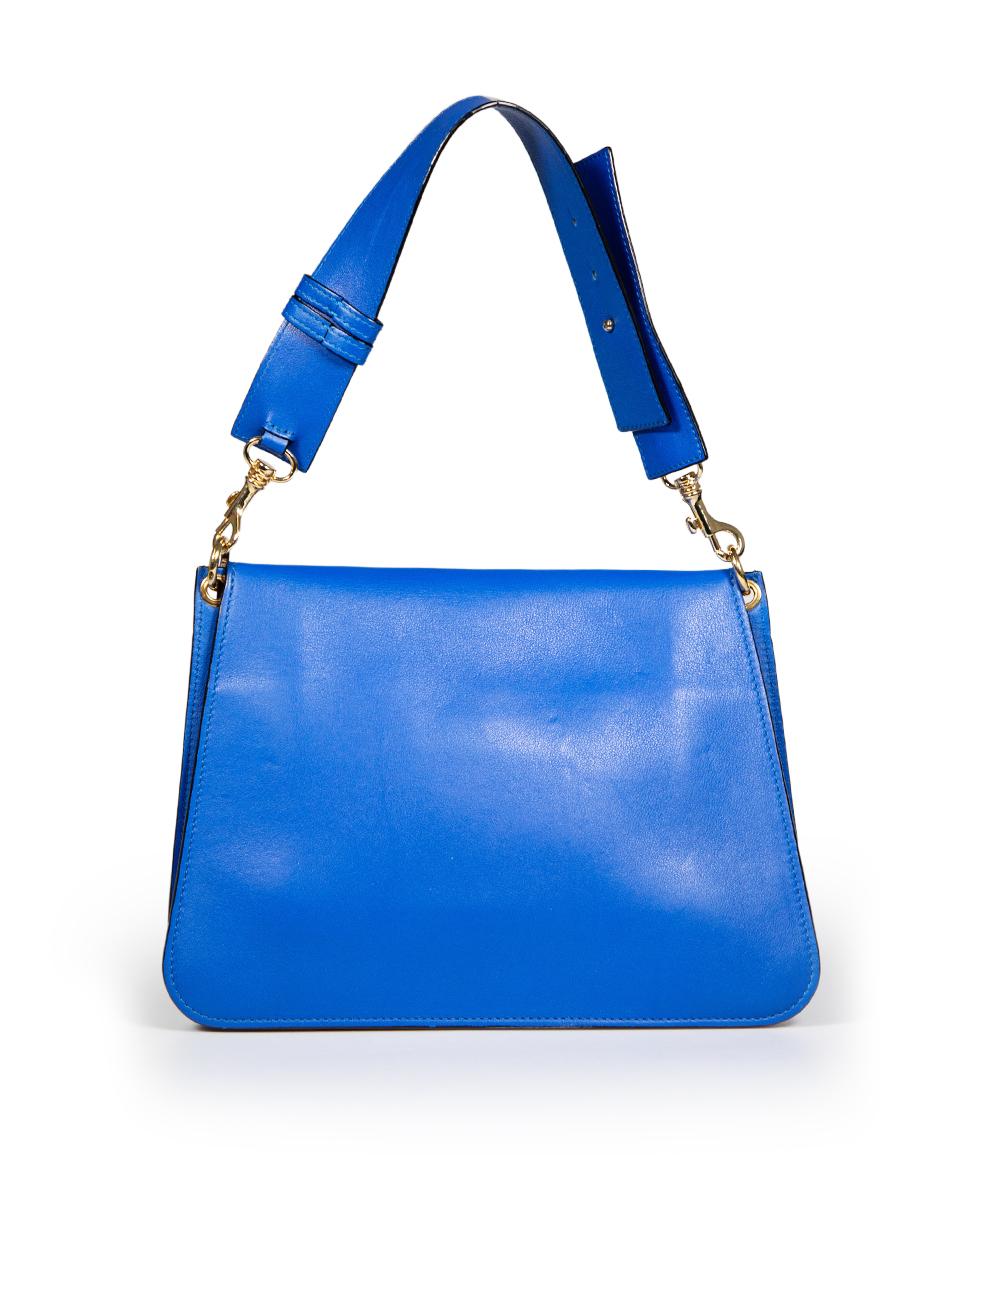 J.W.Anderson Blue Leather Adjustable Shoulder Bag In Excellent Condition For Sale In London, GB